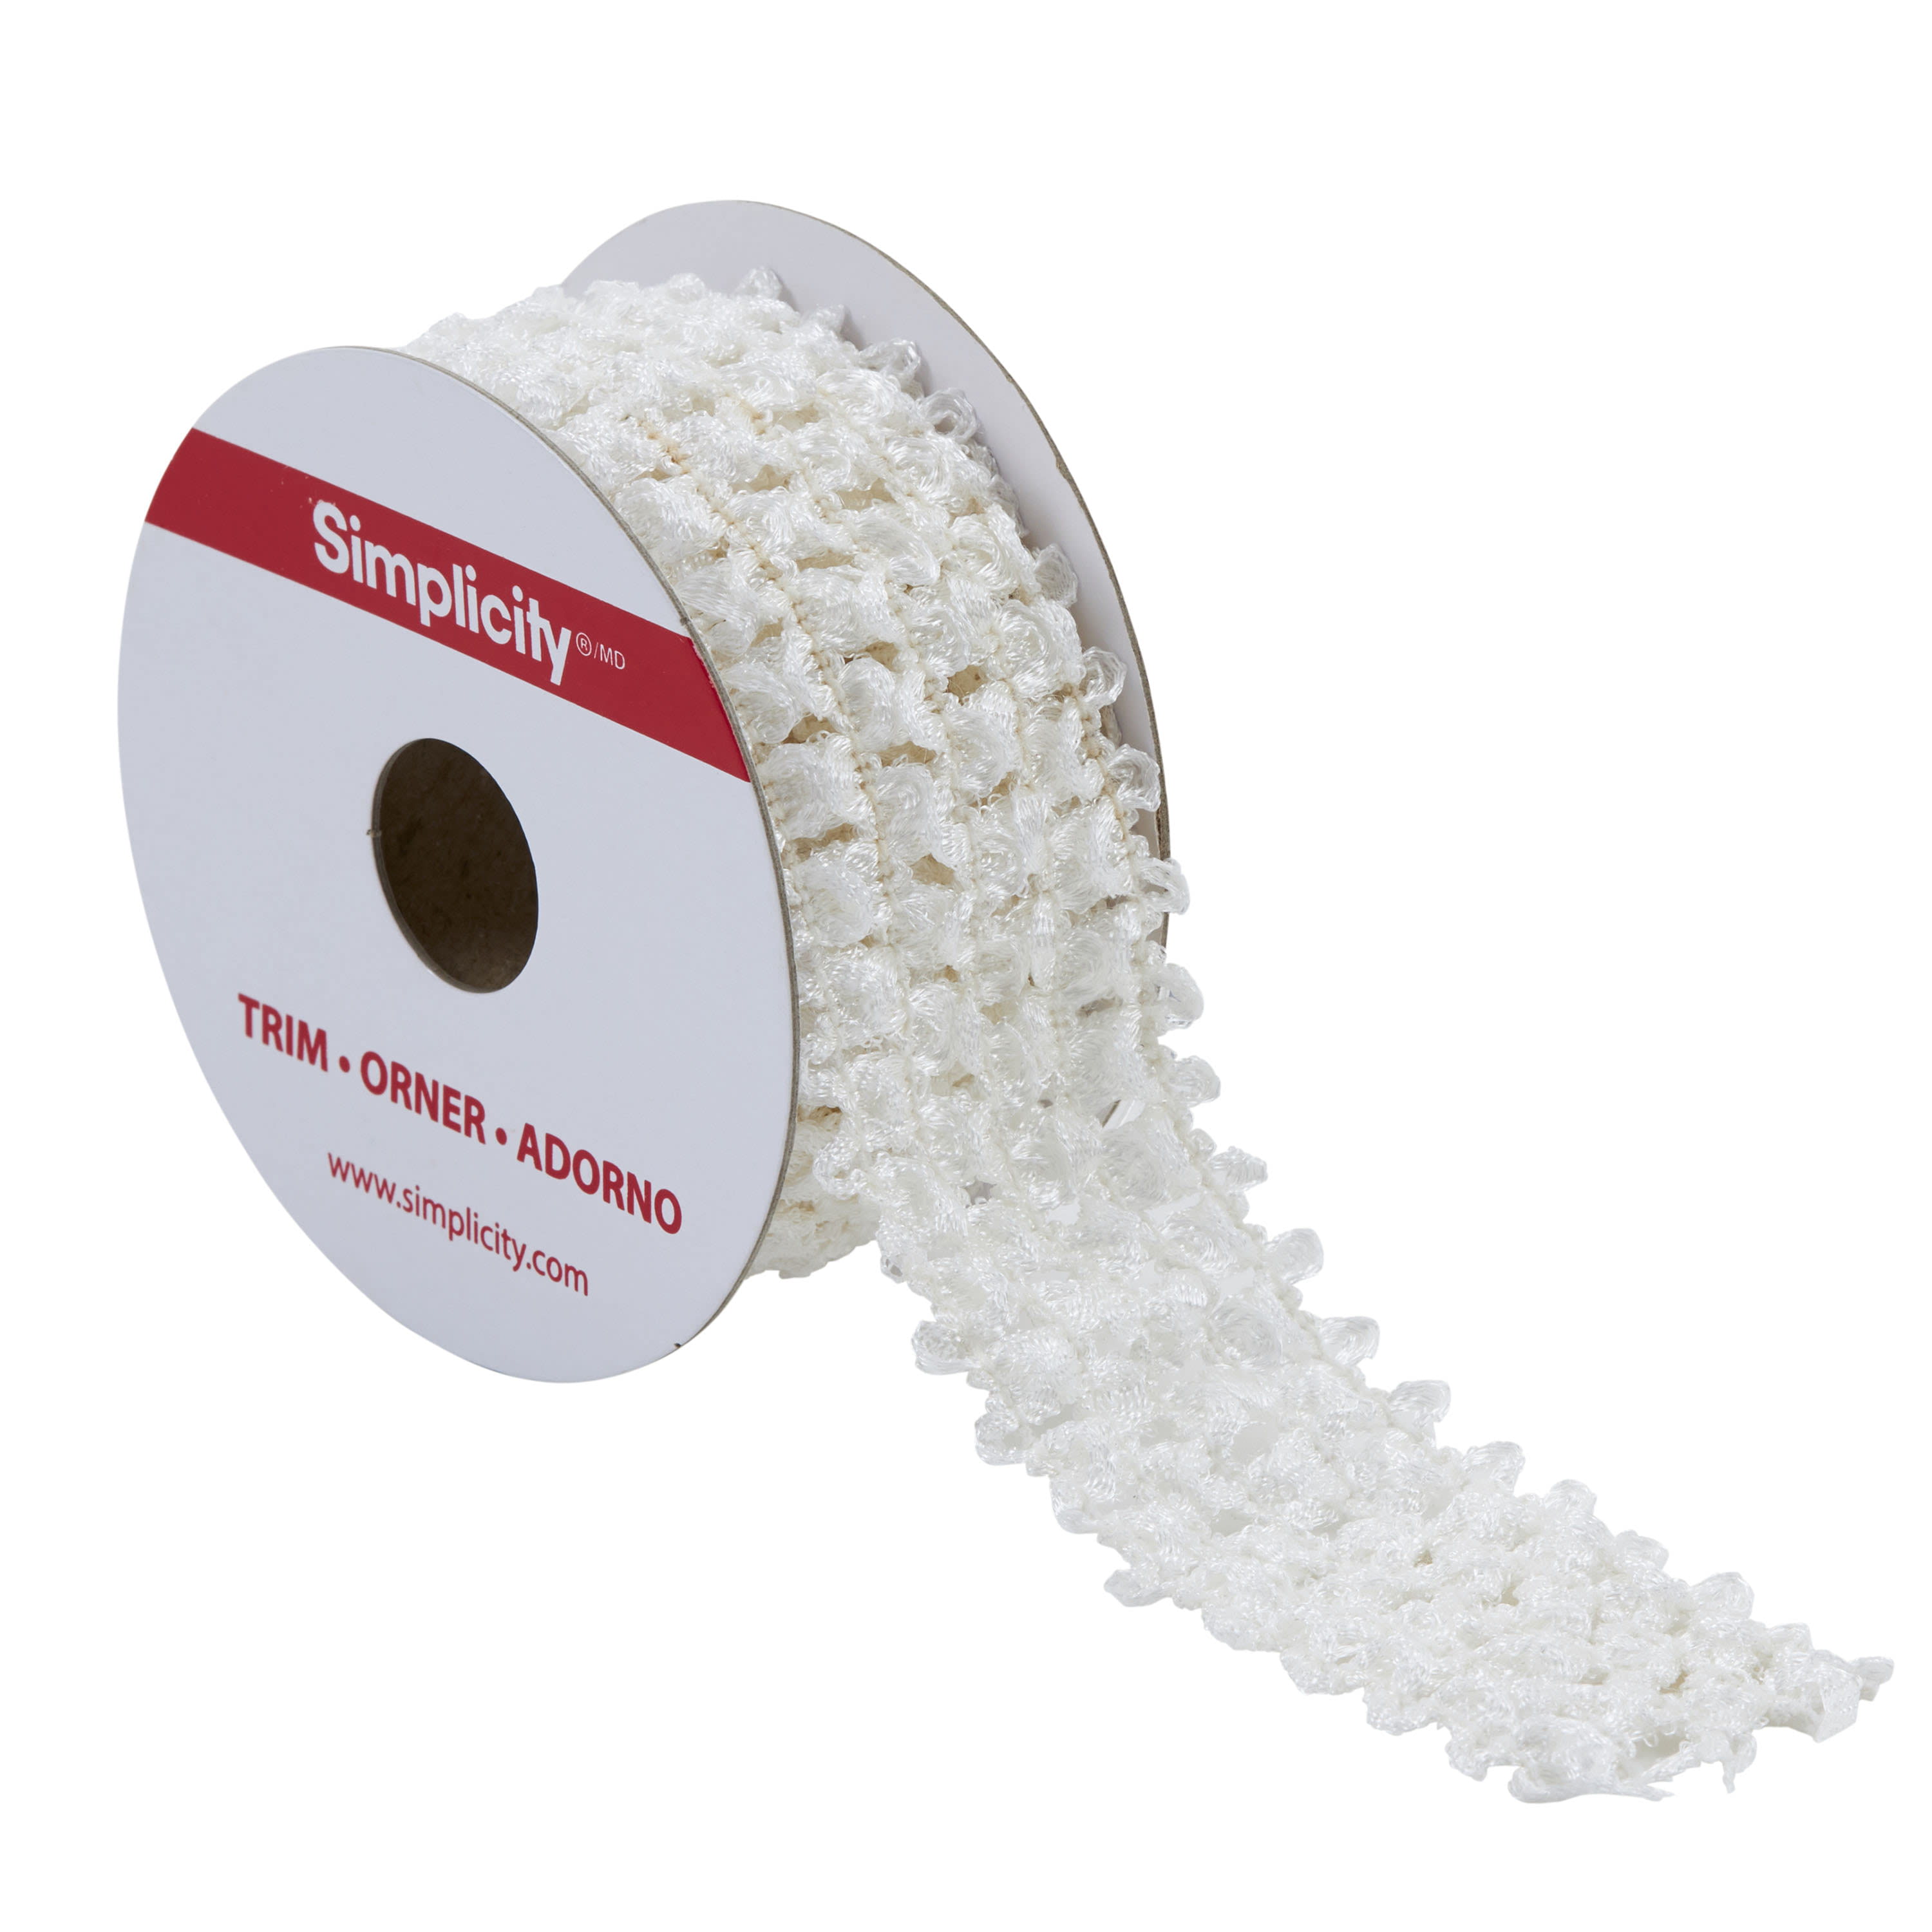 Simplicity Trim, White 1/4 inch Ric Rac Trim Great for Apparel, Home  Decorating, and Crafts, 3 Yards, 1 Package